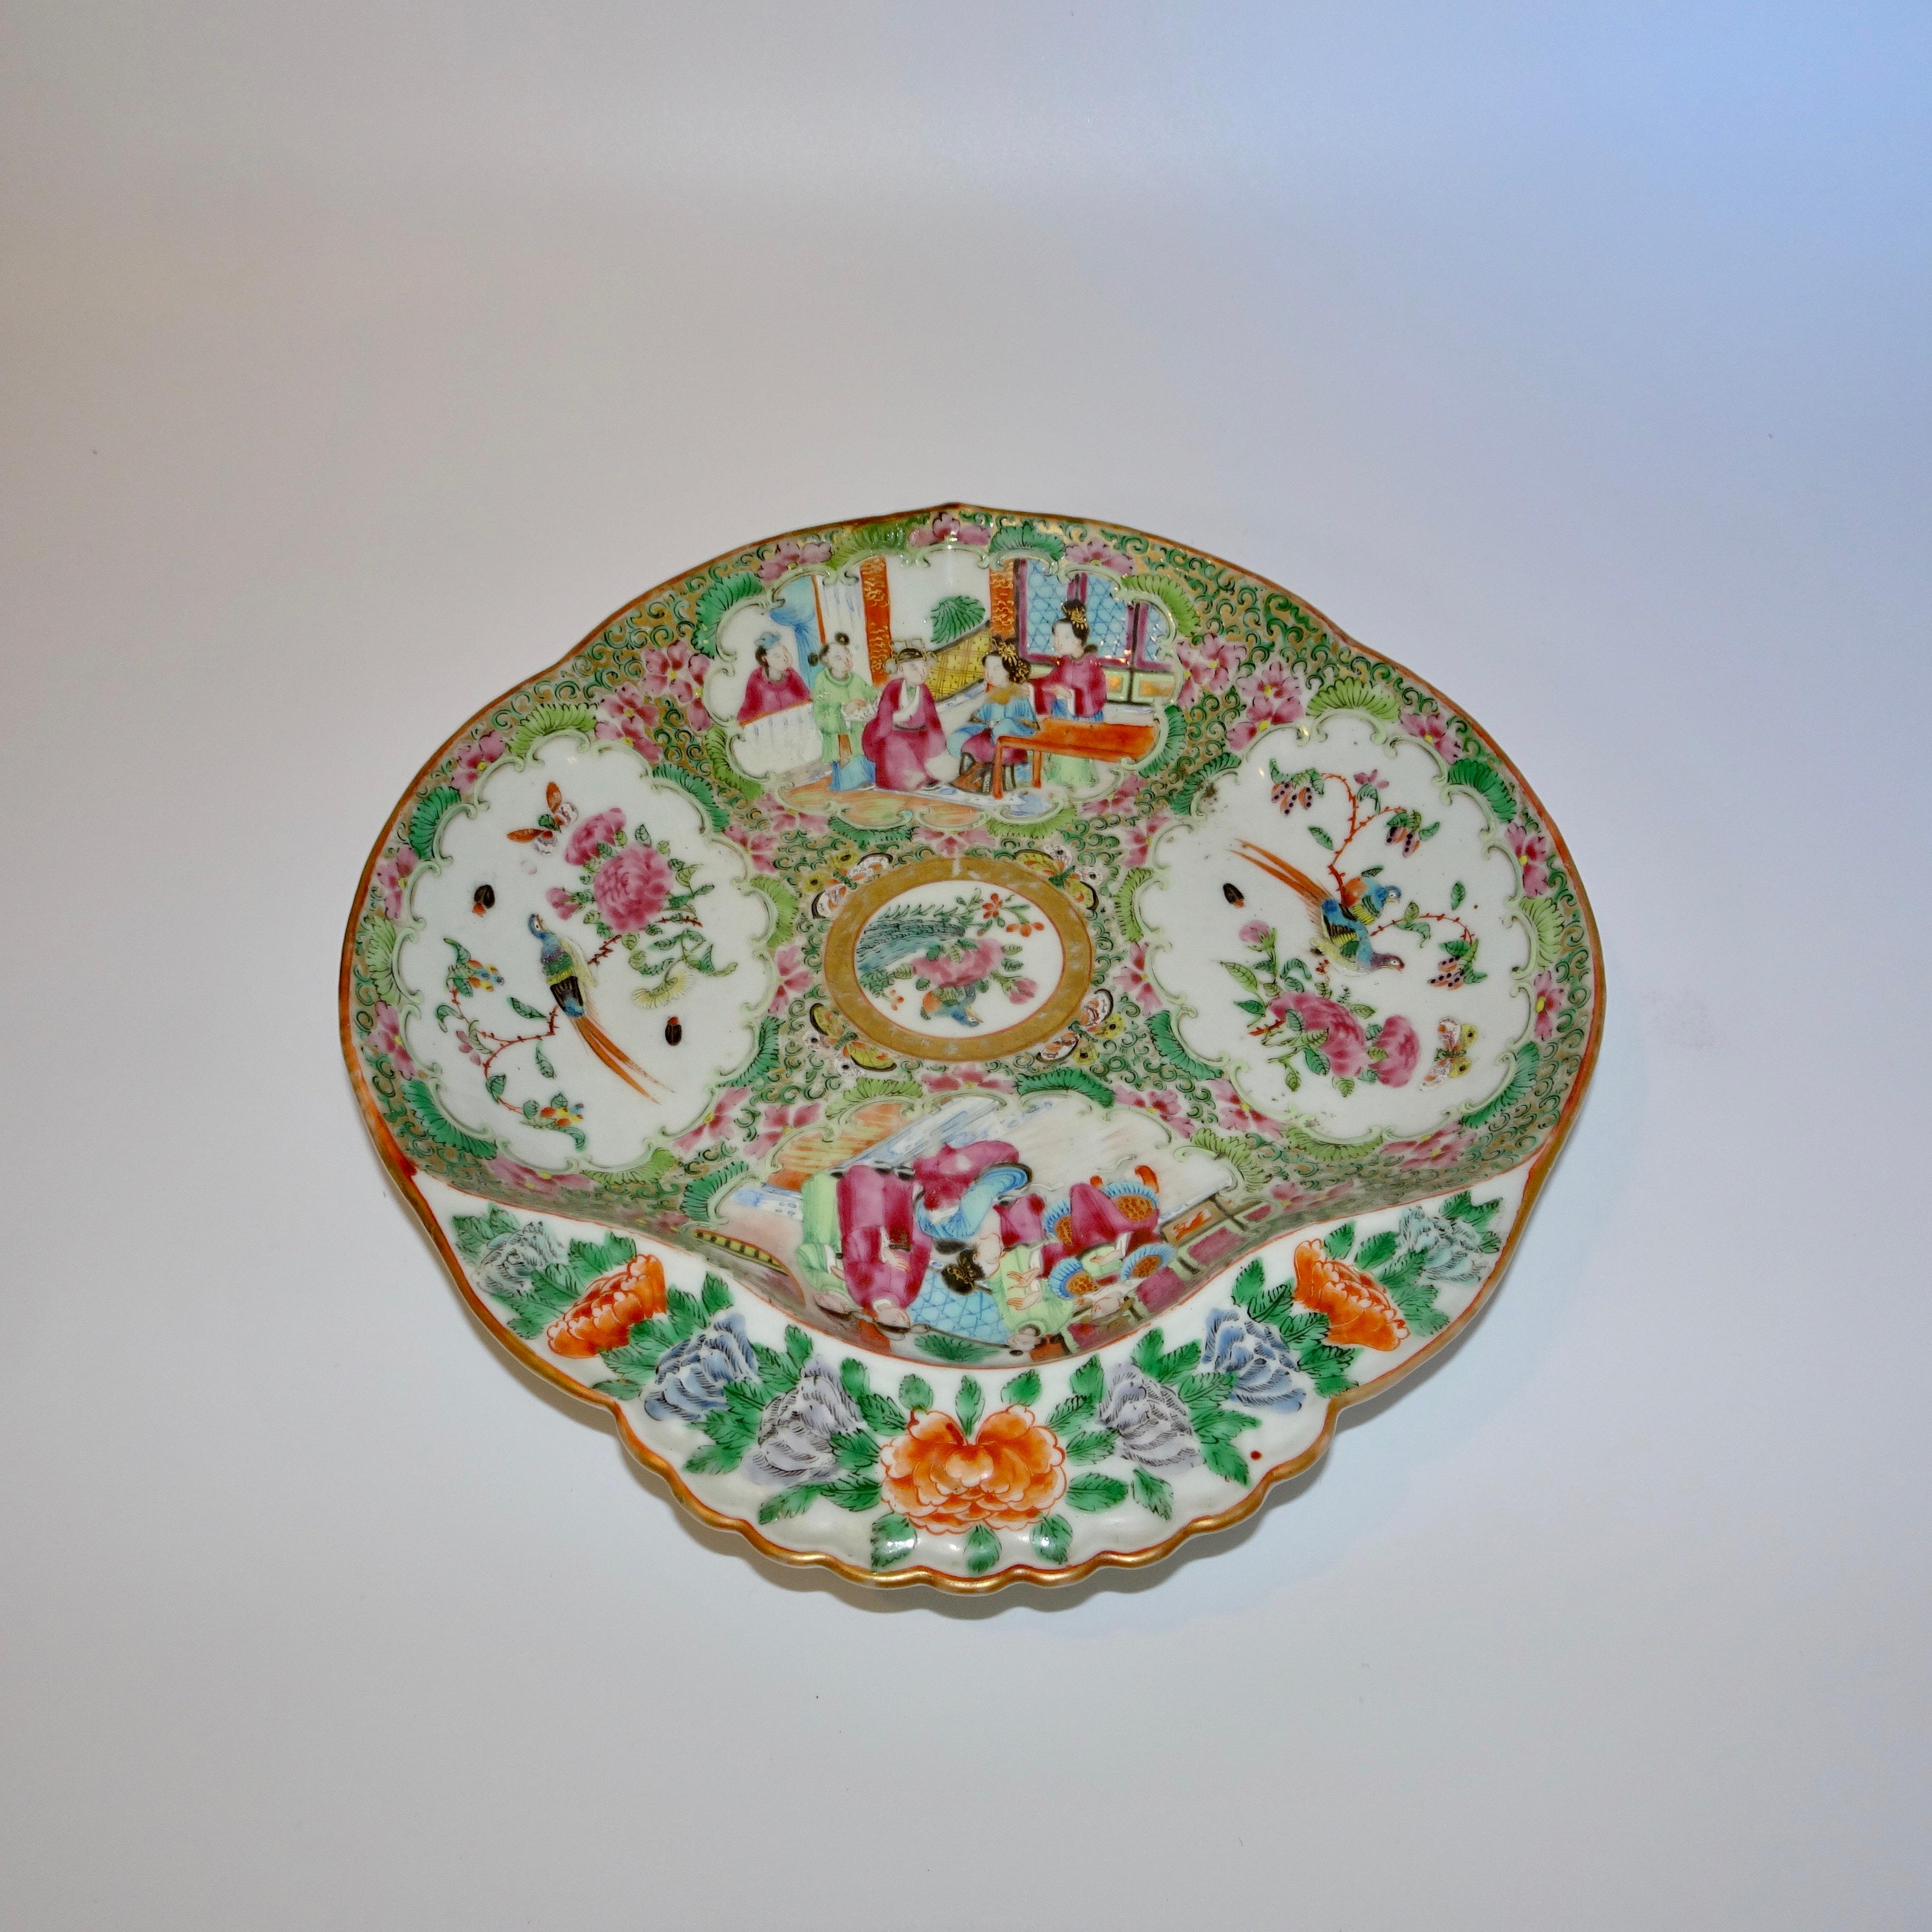 This 19th century Chinese rose medallion porcelain dish can also be called a shrimp plate. The dish is in the traditional rose medallion colors of green, pink, orange and blue.